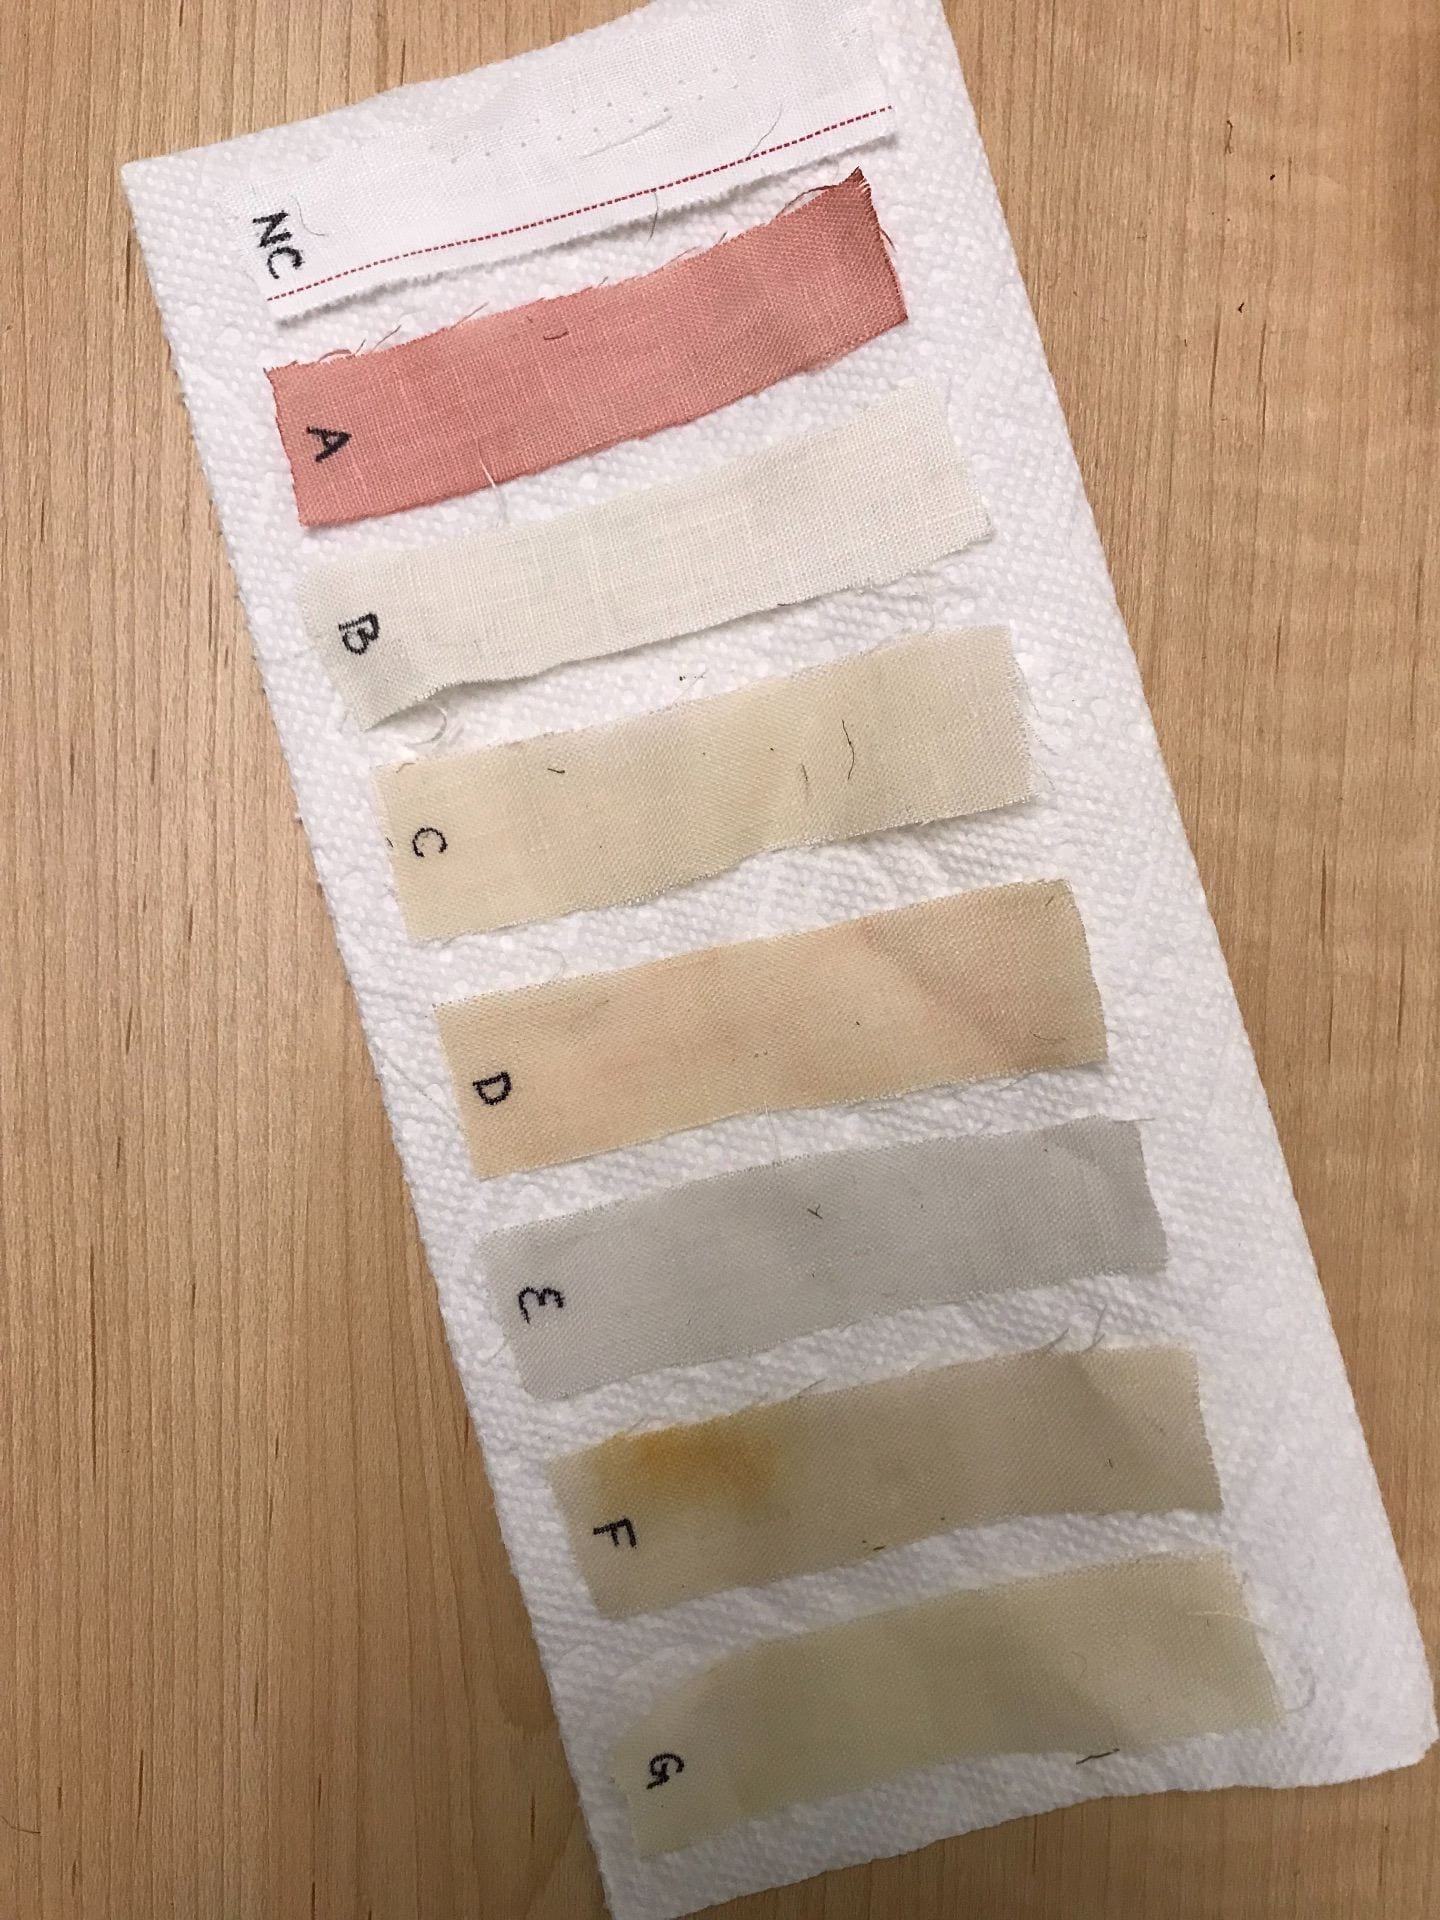 Natural Dye Experiment